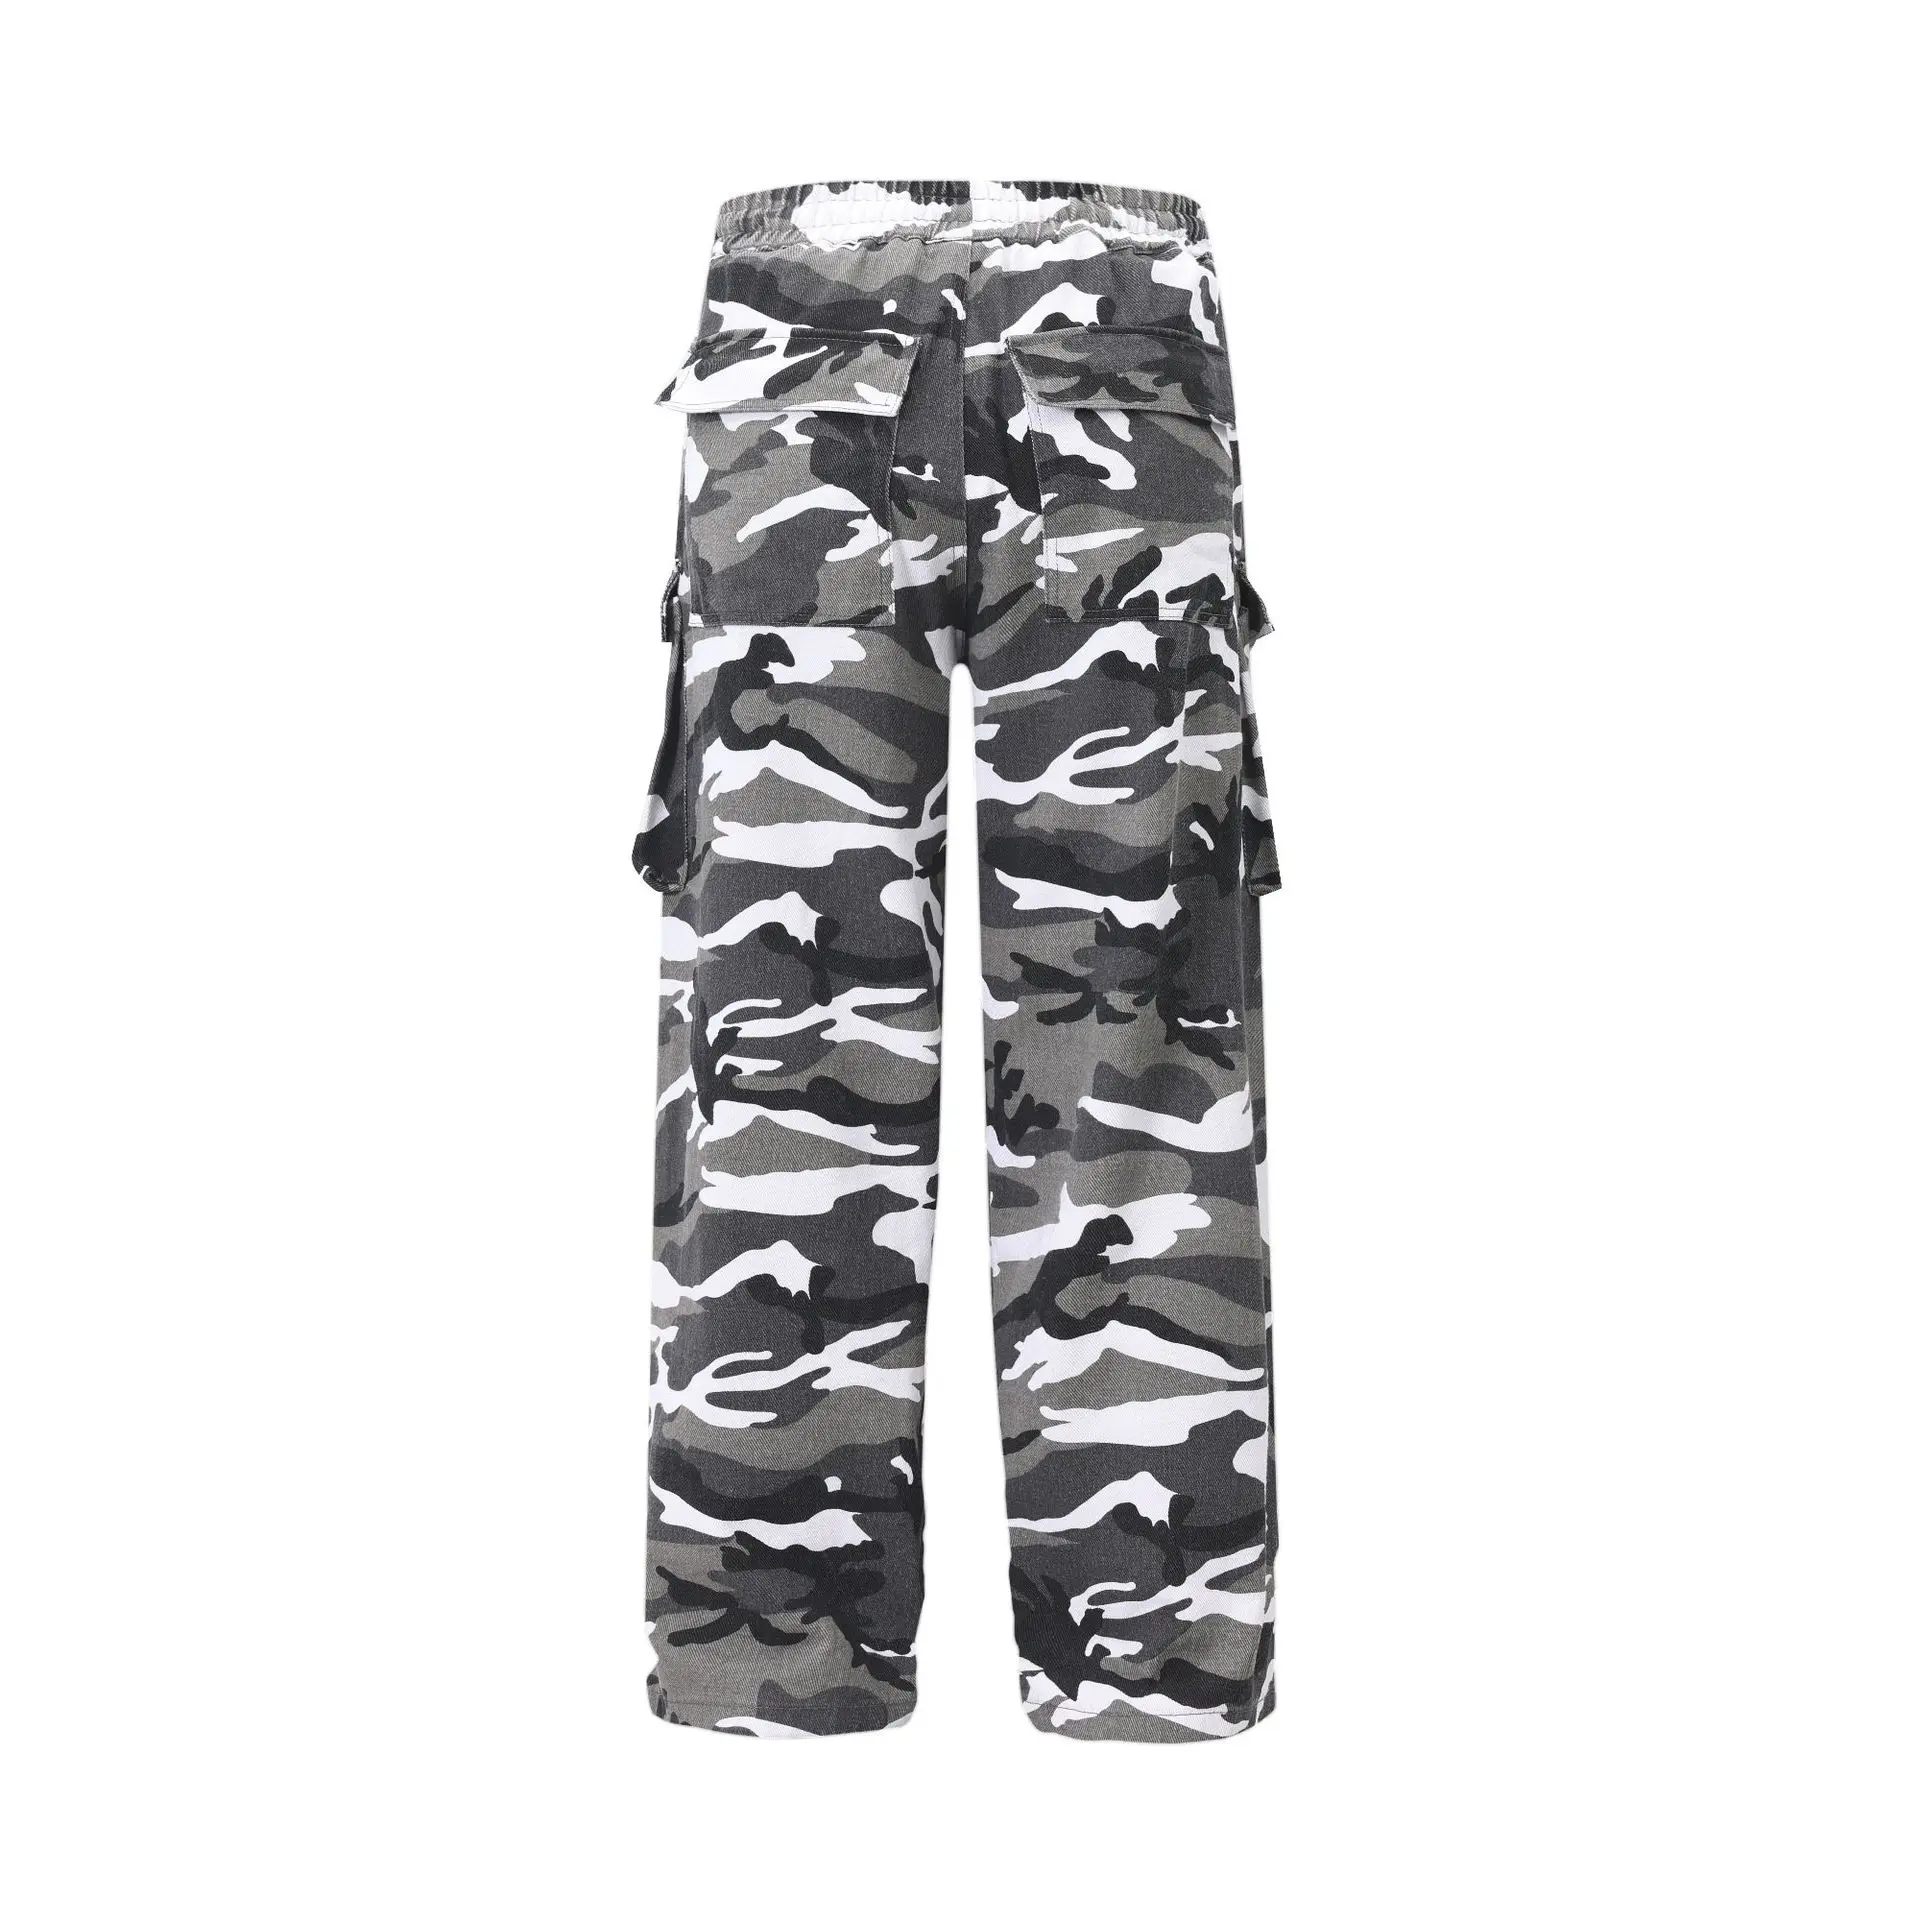 Snow Camo Cargo Pants miteigi Men’s Swag American Retro Hip Hop High Street Baggy Slender Waist Patchwork Camouflage Wide leg mid rise waist tall plus size mens trousers in black and white for man